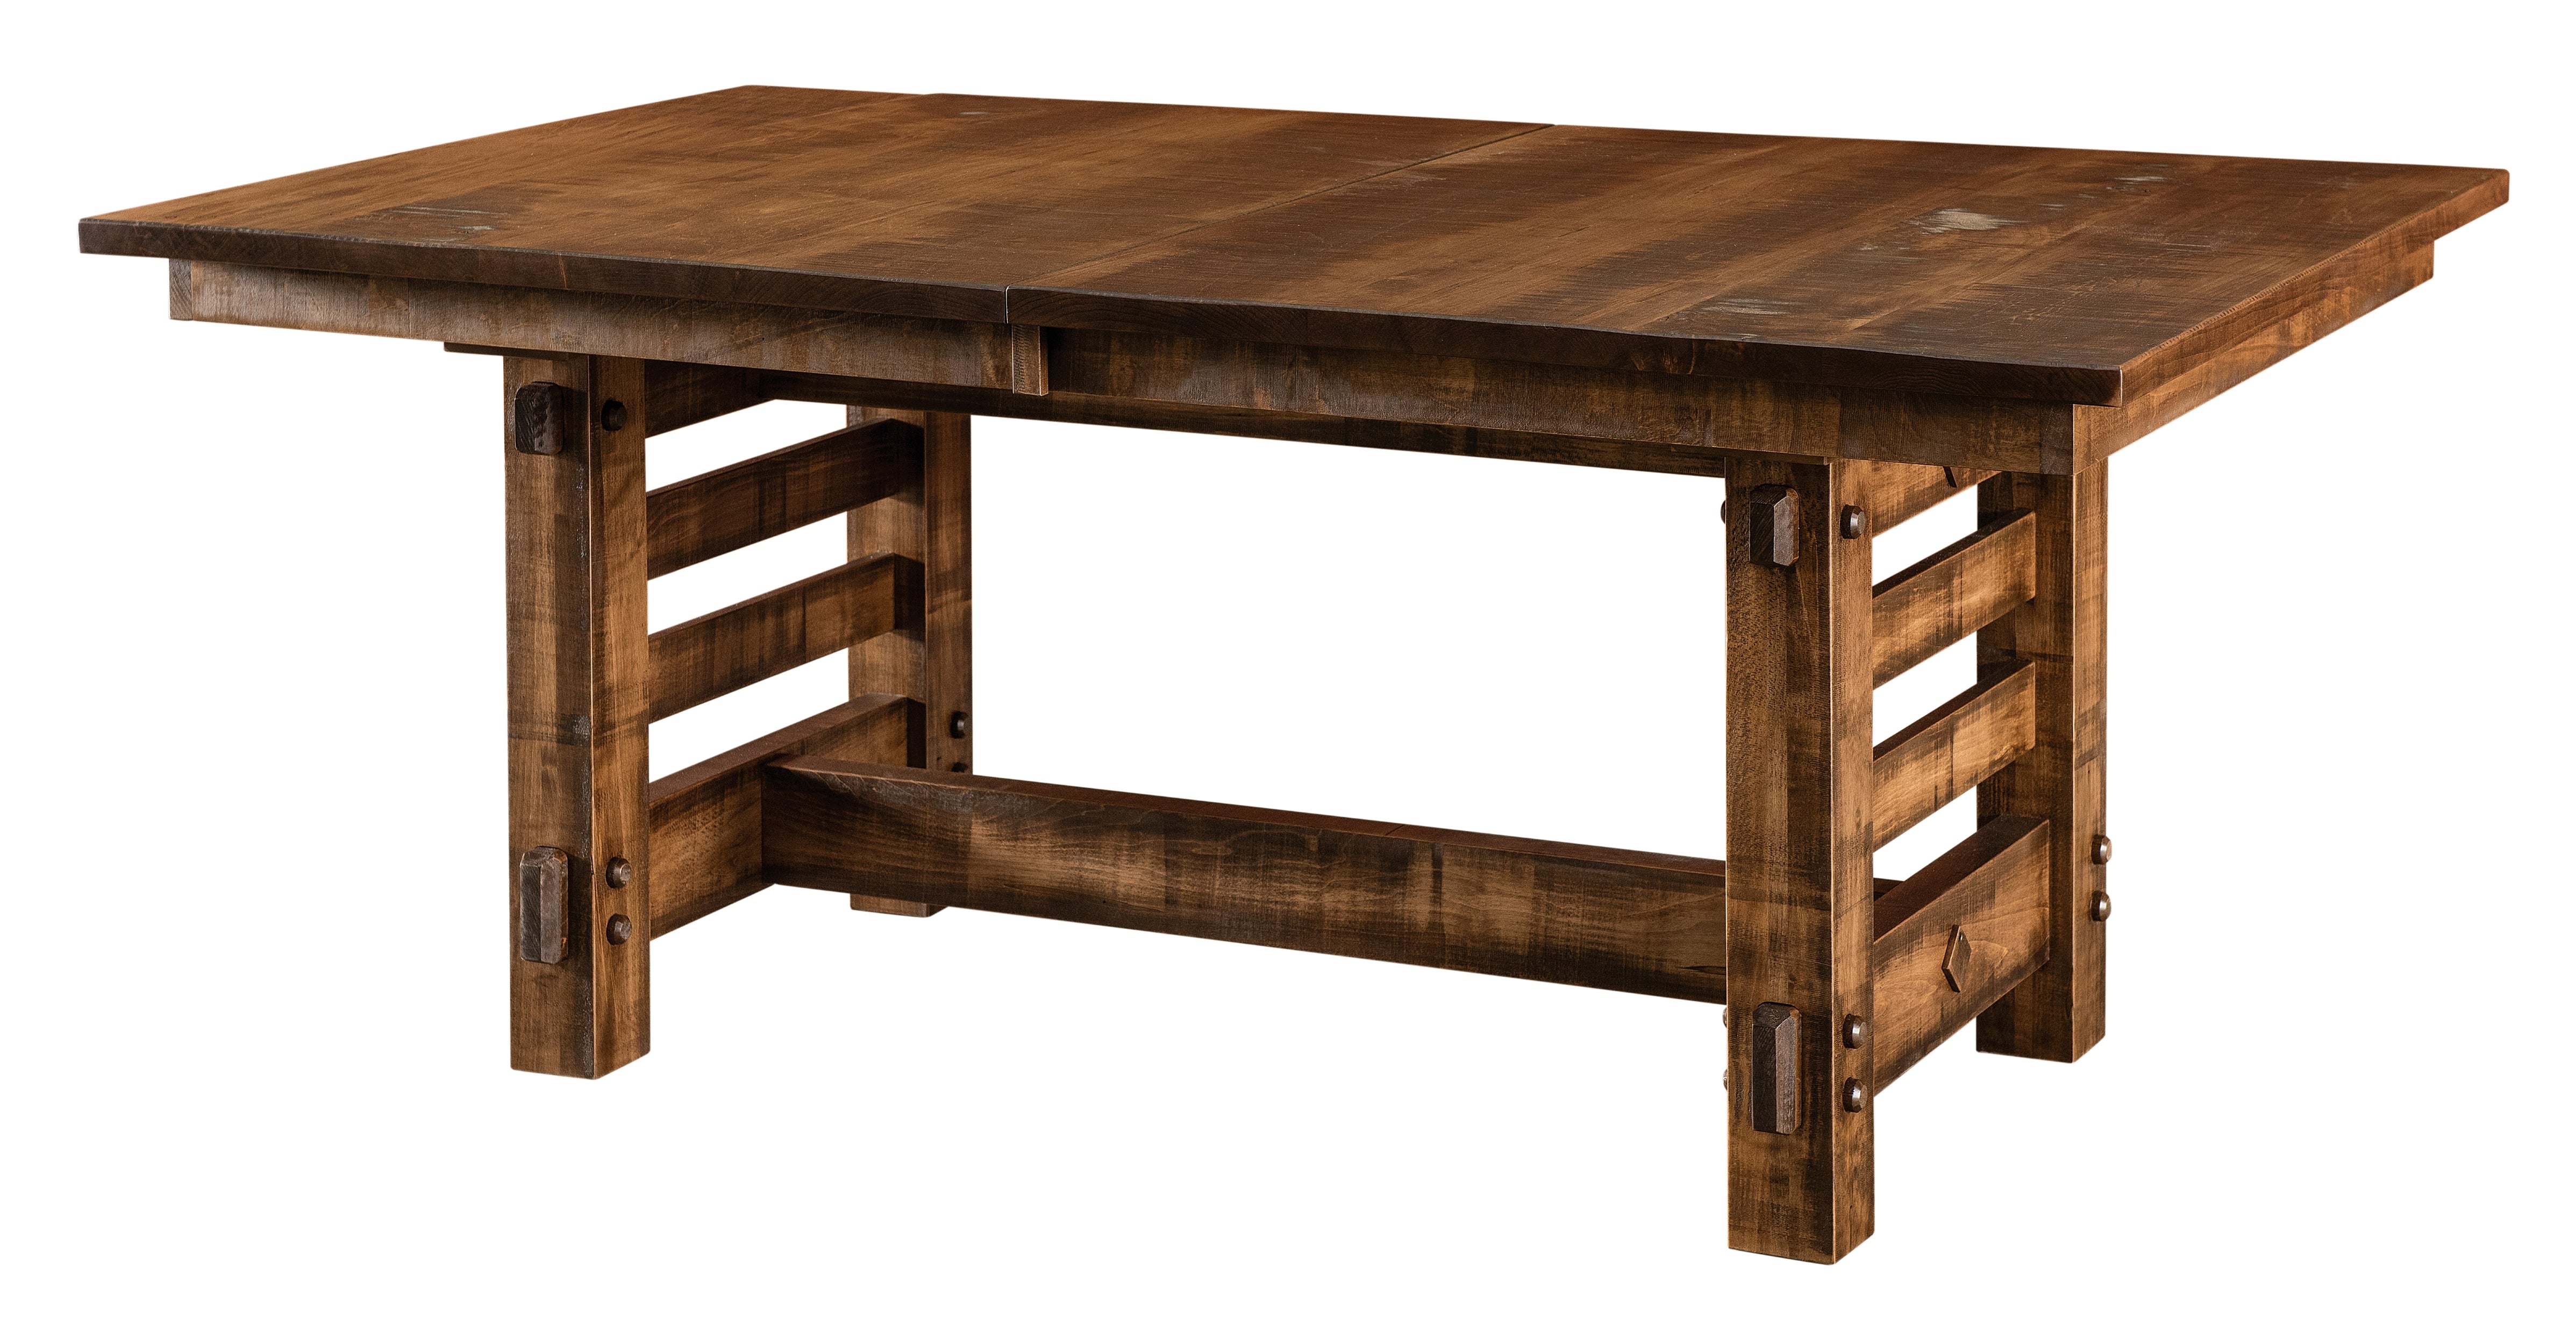 Columbus Trestle Table shown in Roughsawn Wormy Maple with the Almond Stain. The Amish House